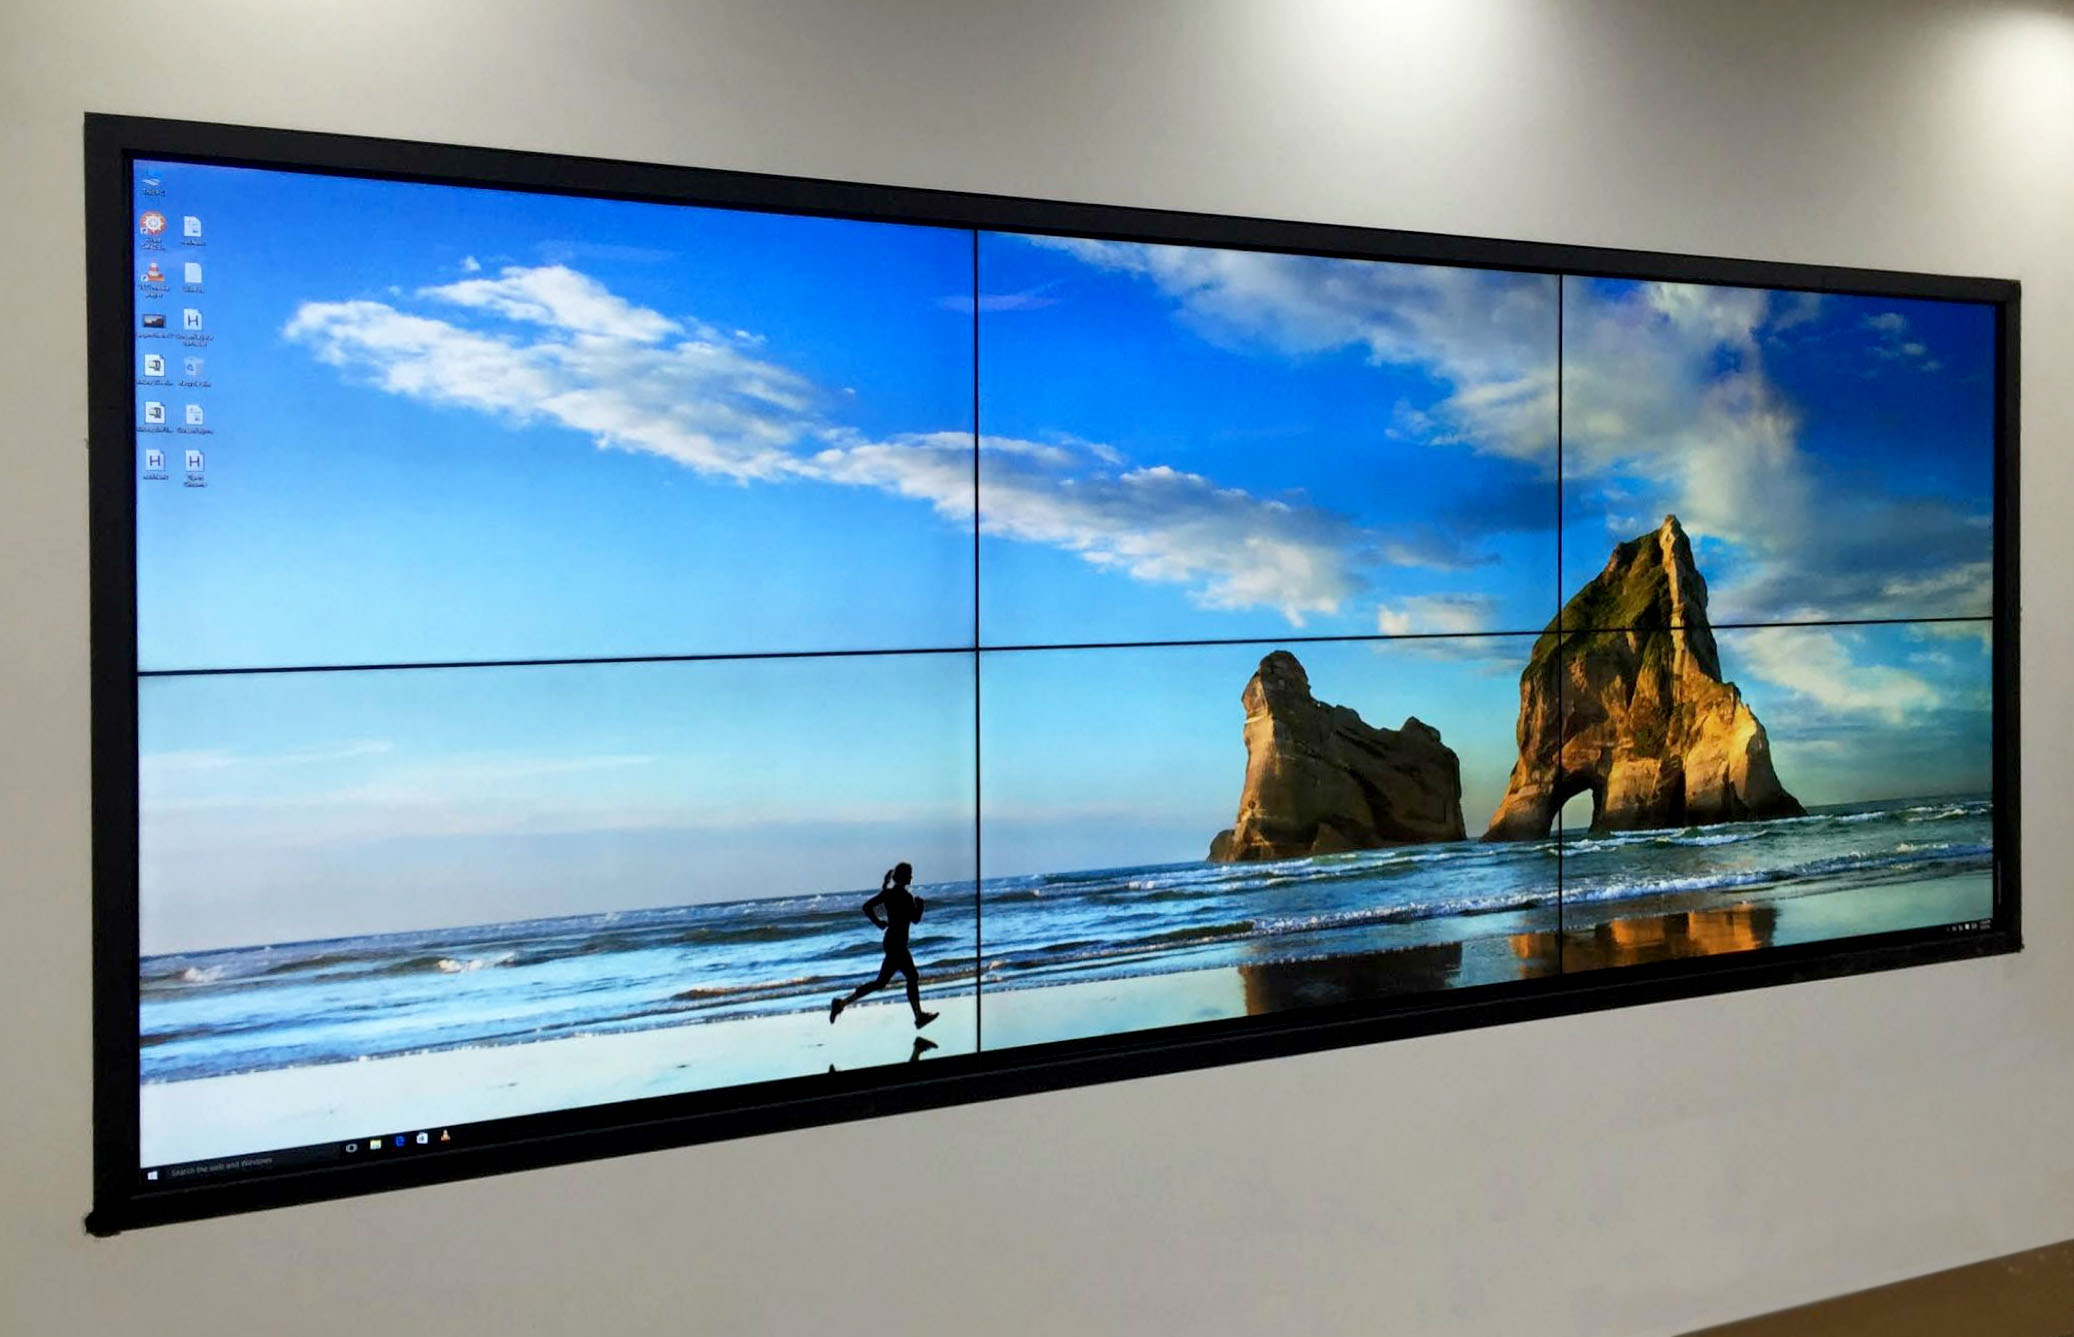 Video Walls Market Analysis and Forecast to 2031-Report